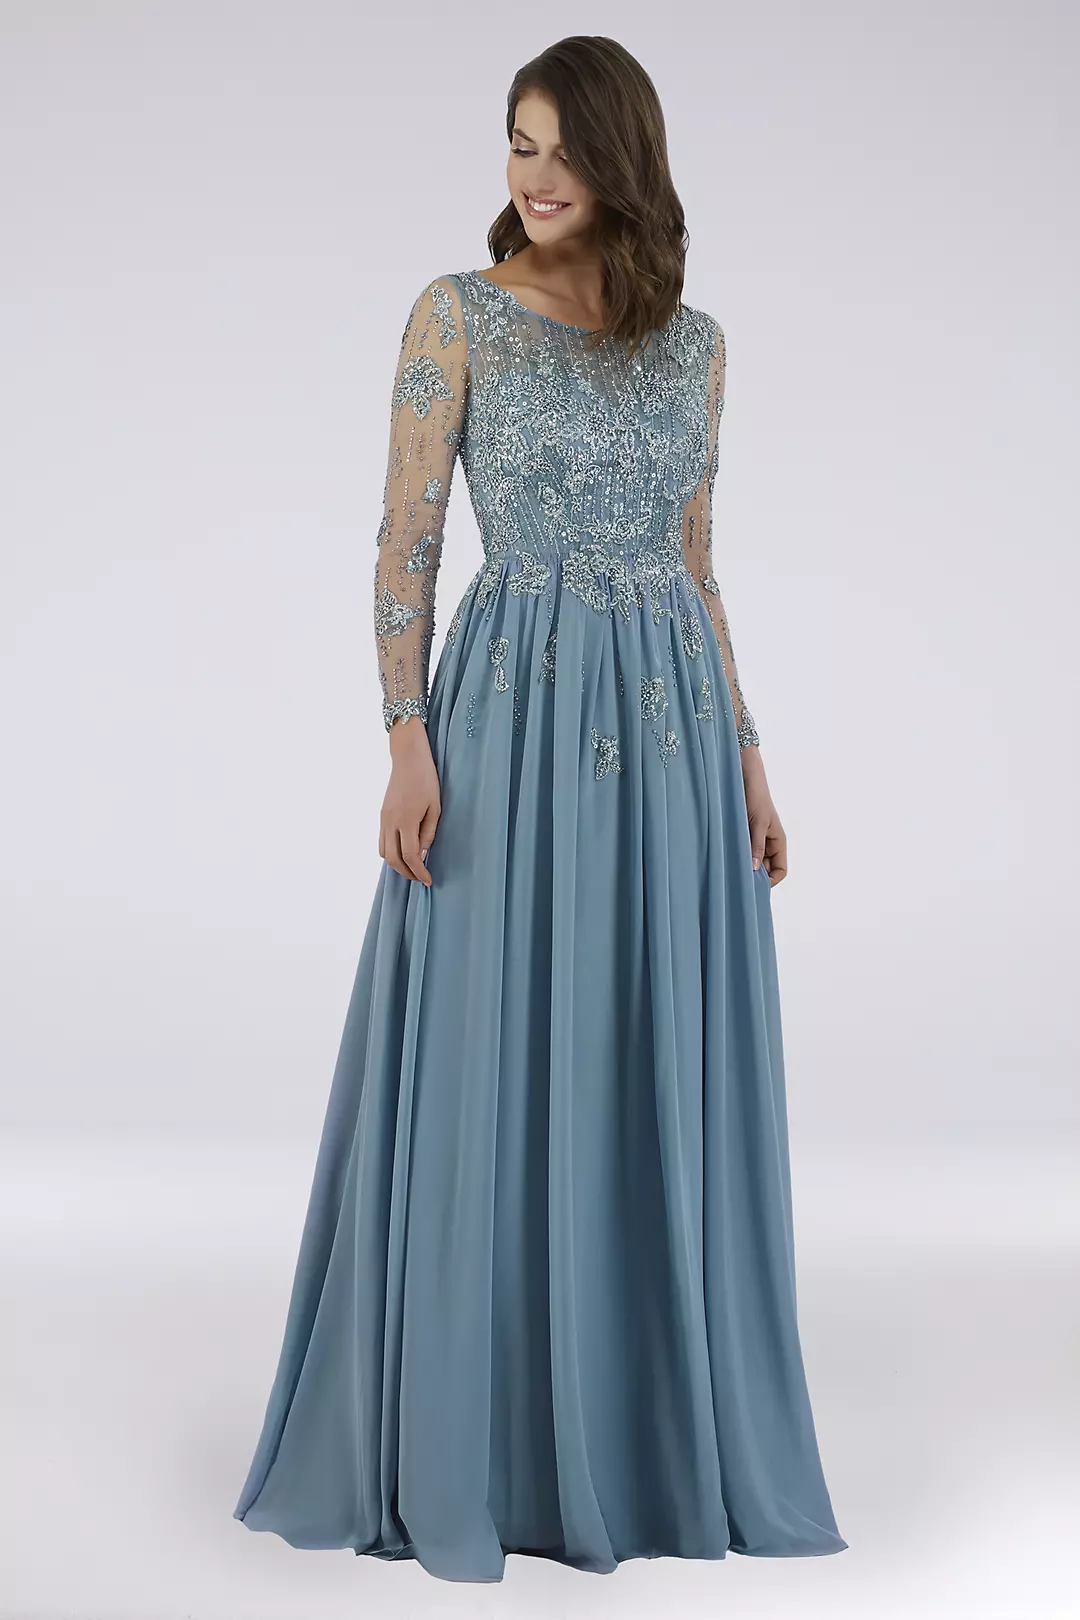 Lara Floral Applique Long Sleeve Chiffon Ball Gown Image